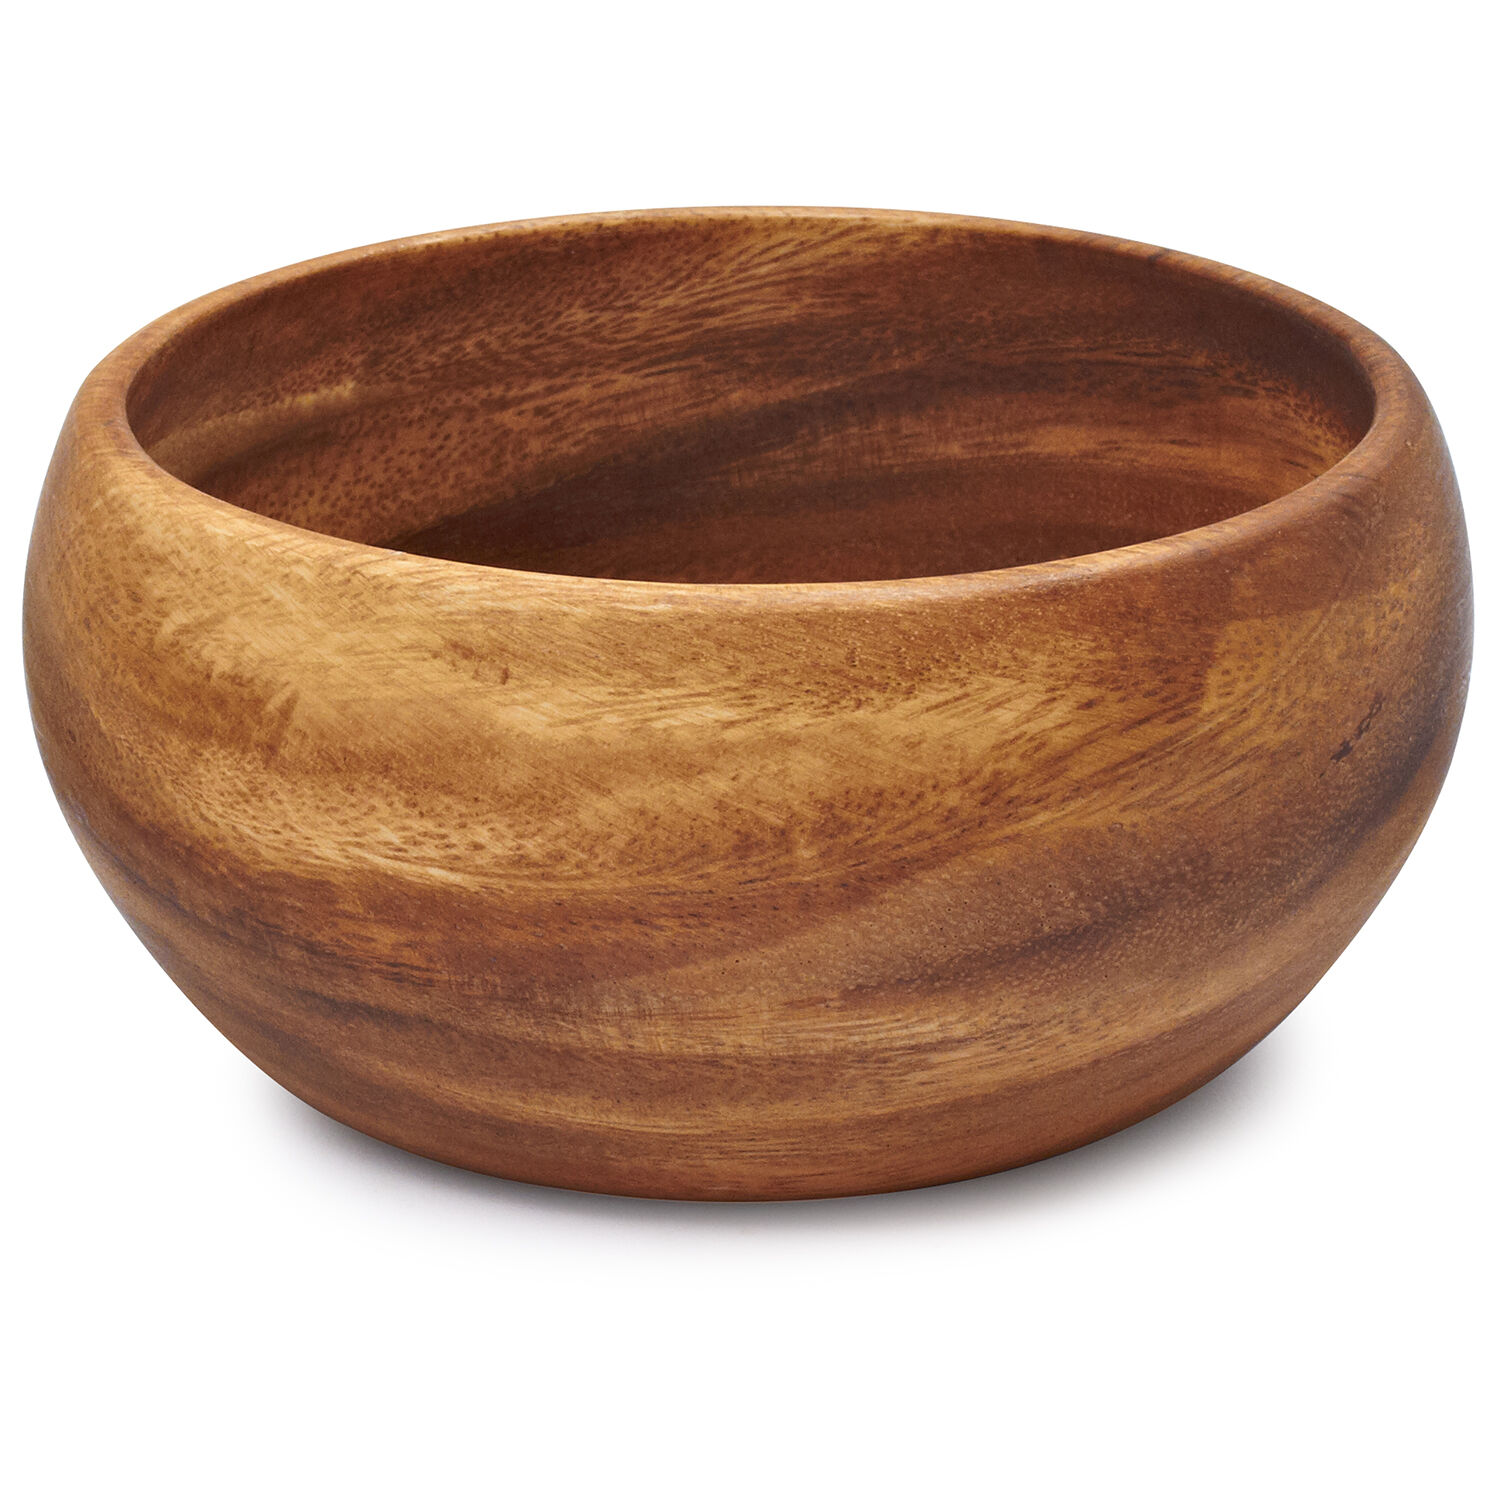 Elegant Wooden Salad Bowl for Mixing and Serving Acacia Wood Serving Bowl for Fruits or Salads 10-inch Round